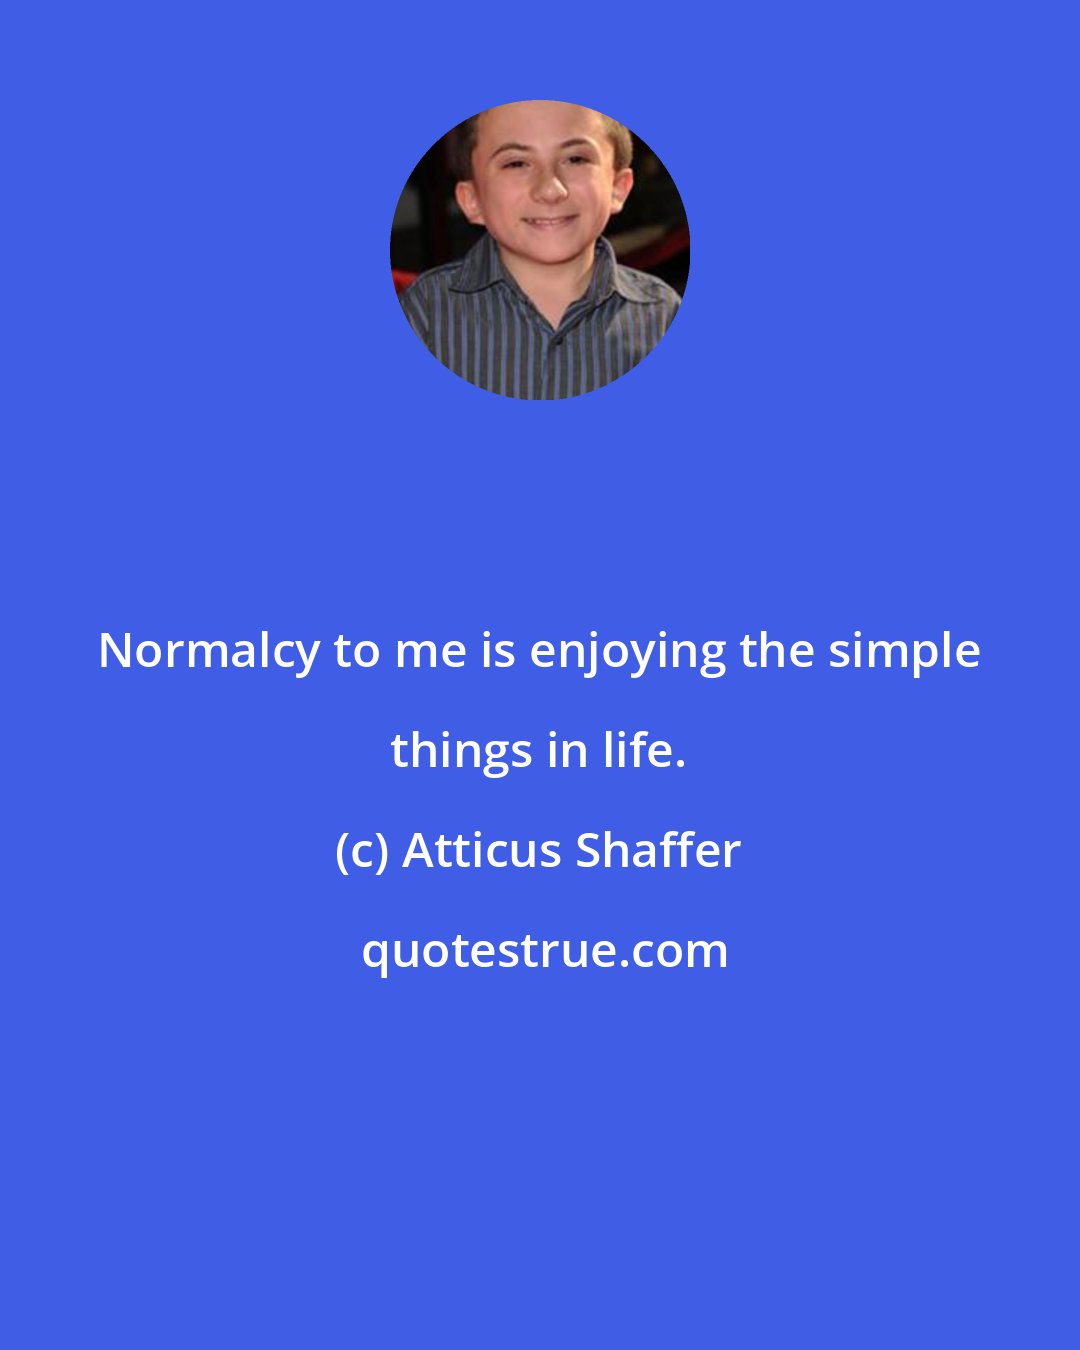 Atticus Shaffer: Normalcy to me is enjoying the simple things in life.